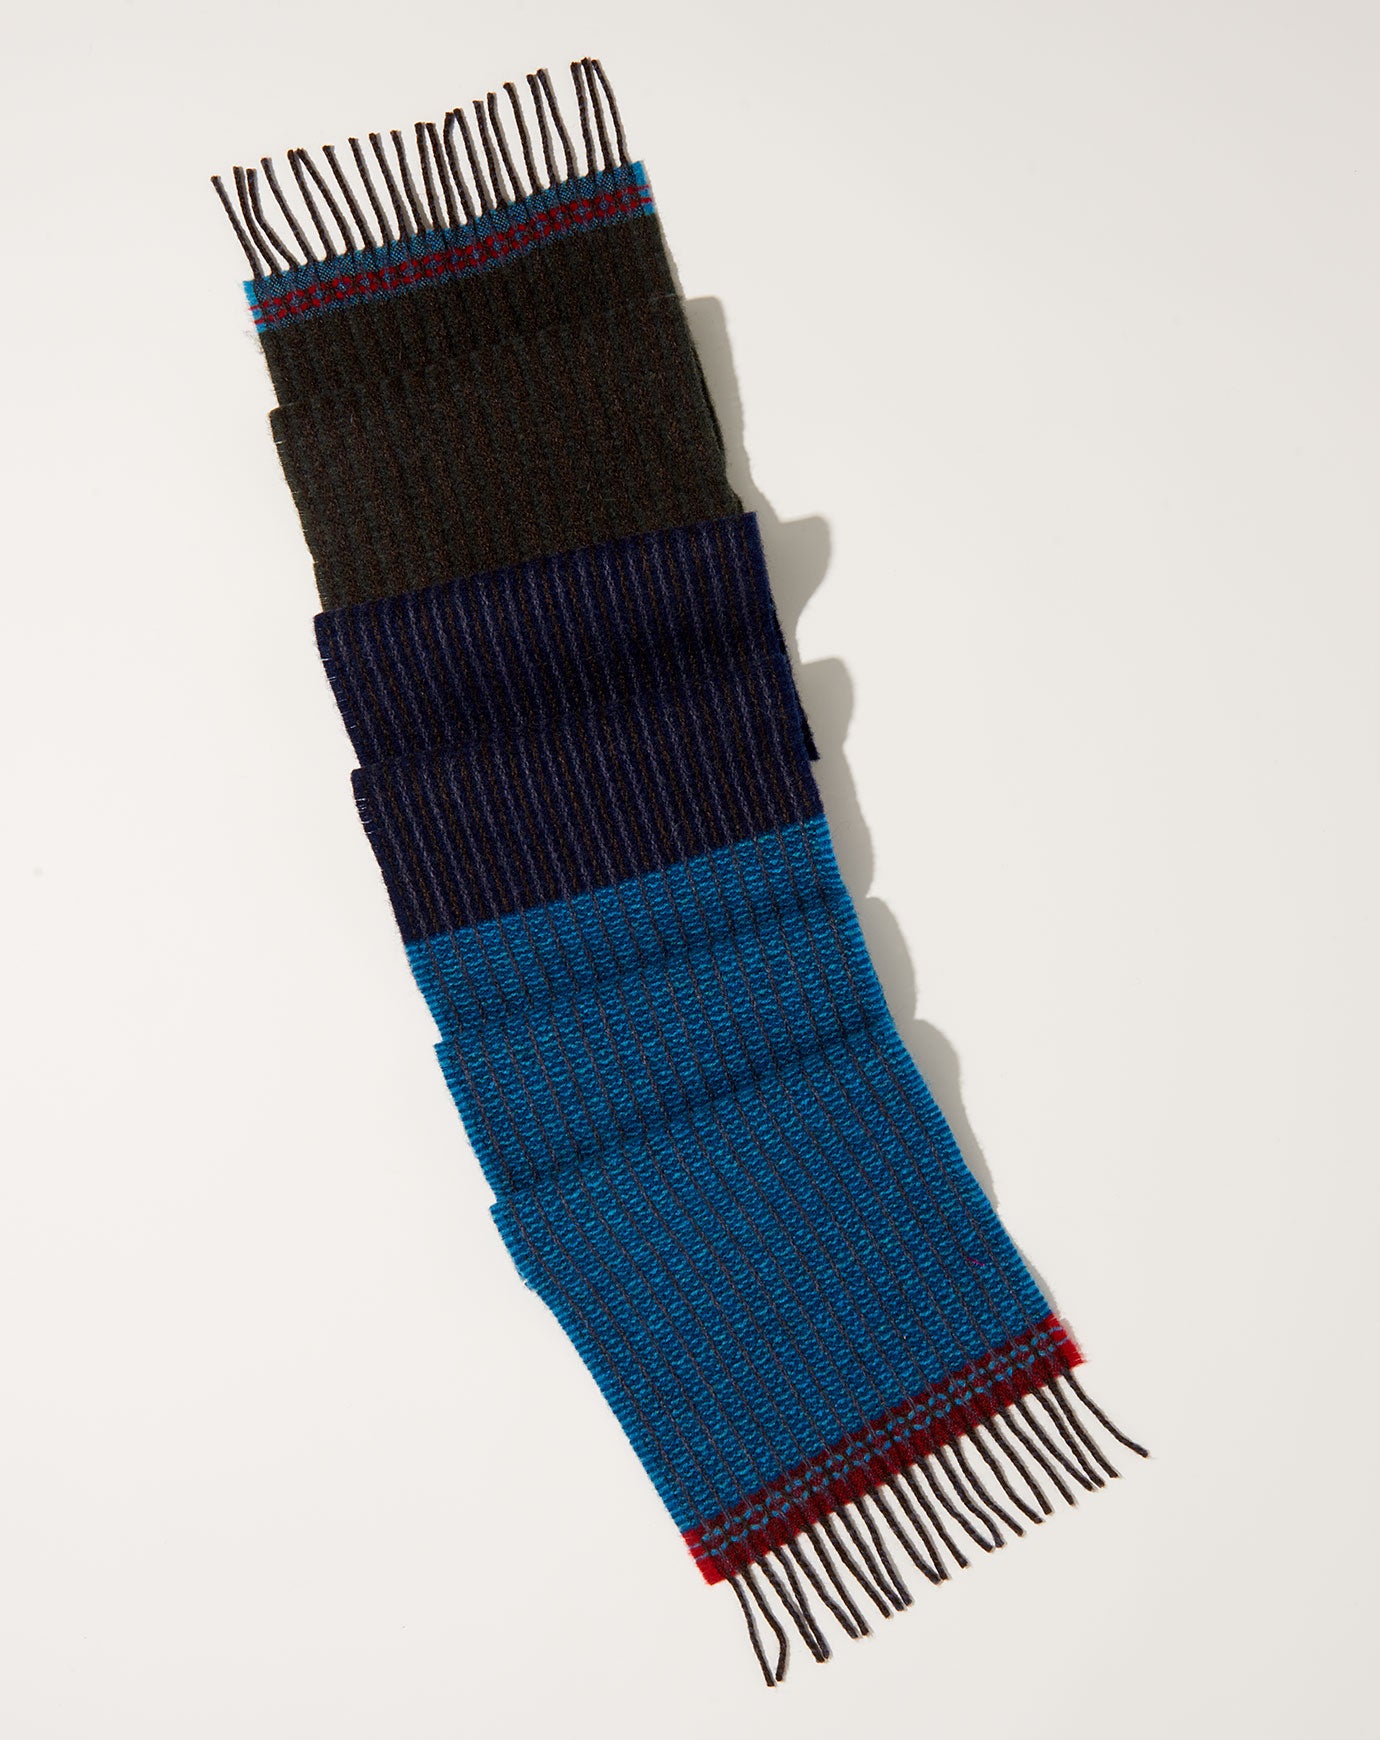 Wallace Sewell Chatham Scarf in Earth